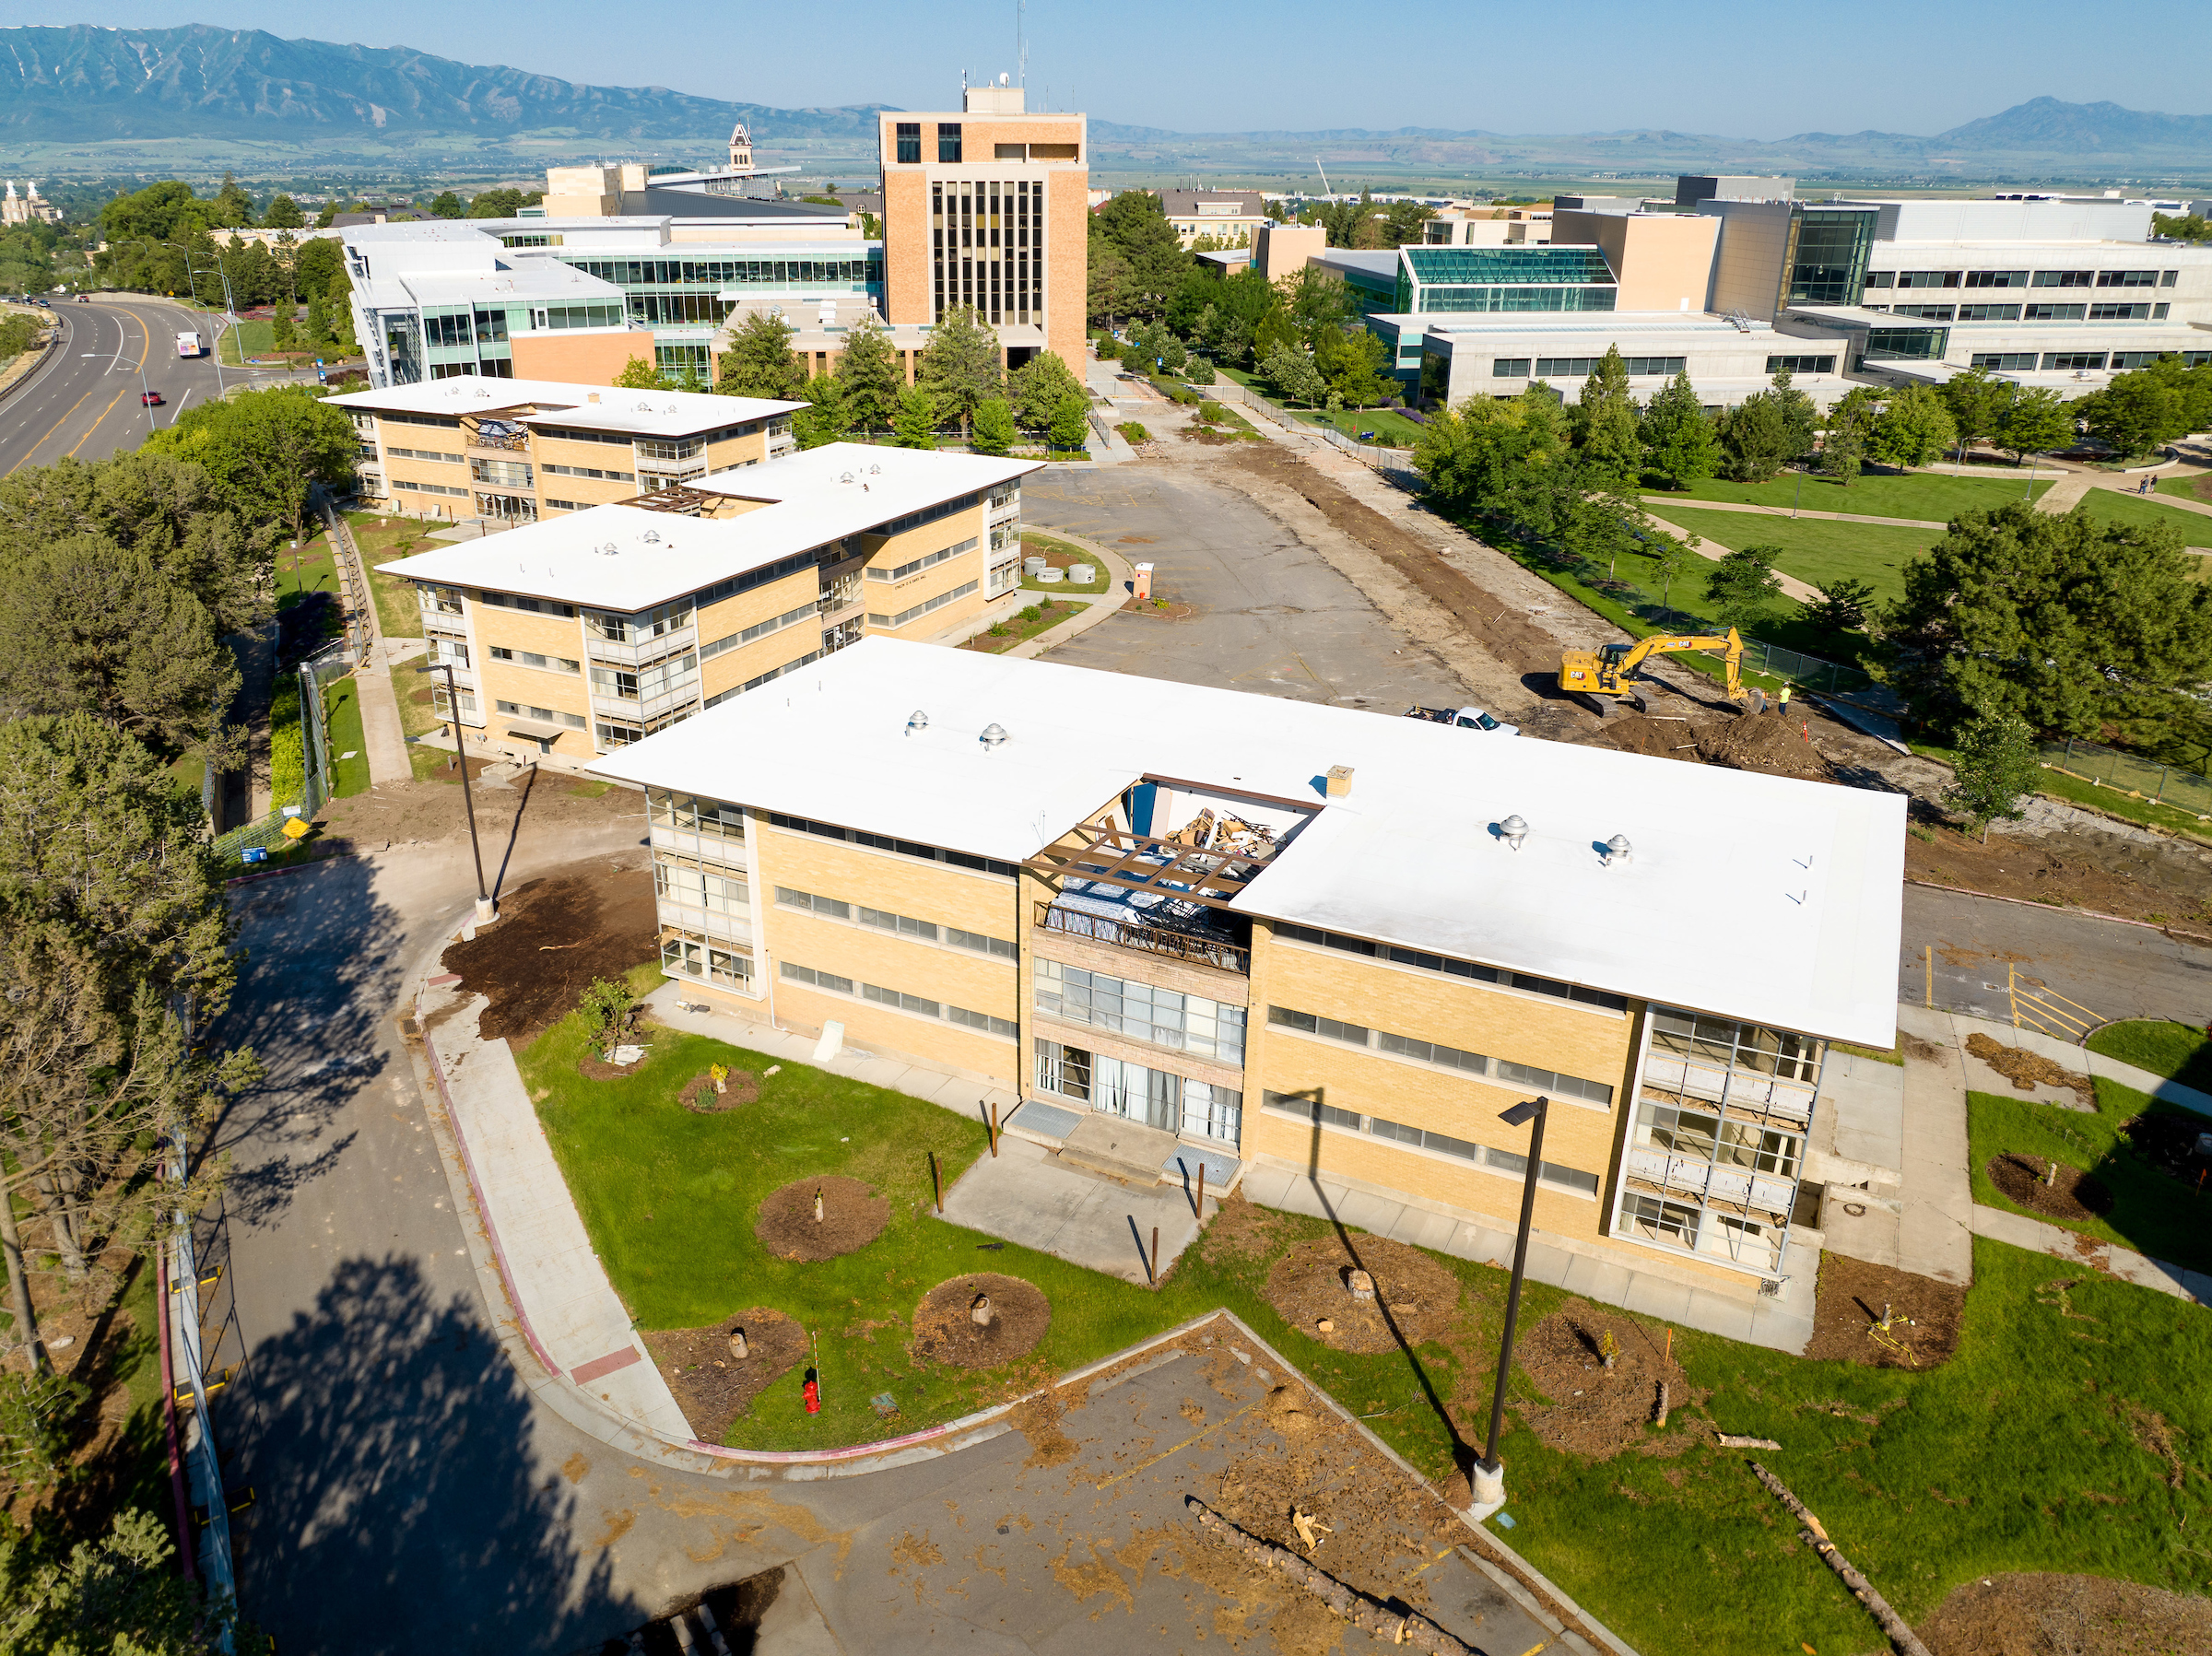 A drone view of three south campus residence halls at Utah State University's Logan campus that are being demolished.